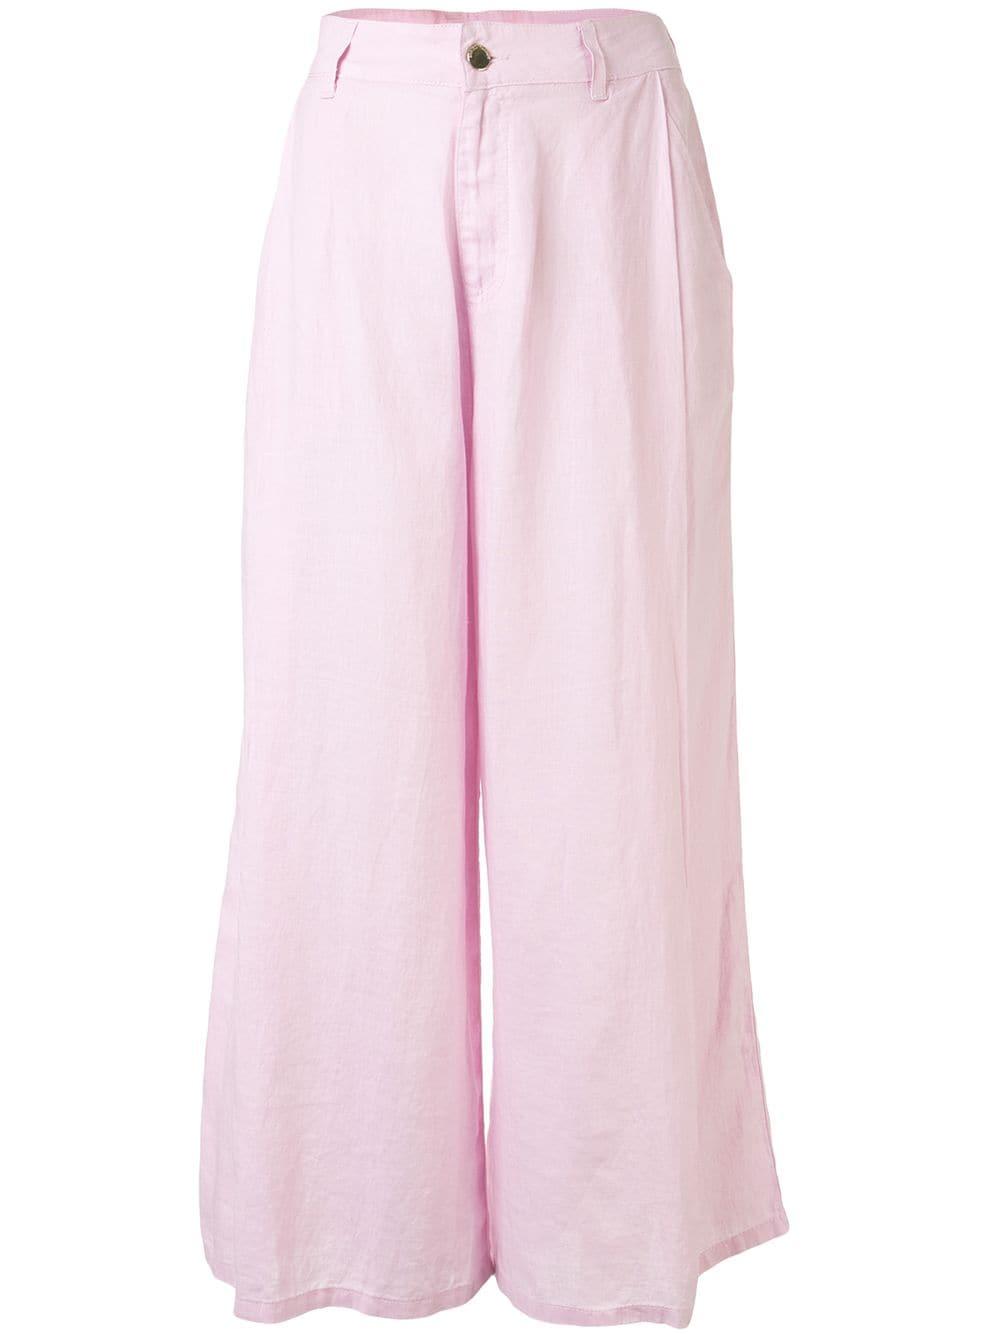 Emporio Armani Linen Wide Leg High Waisted Trousers in Pink - Lyst